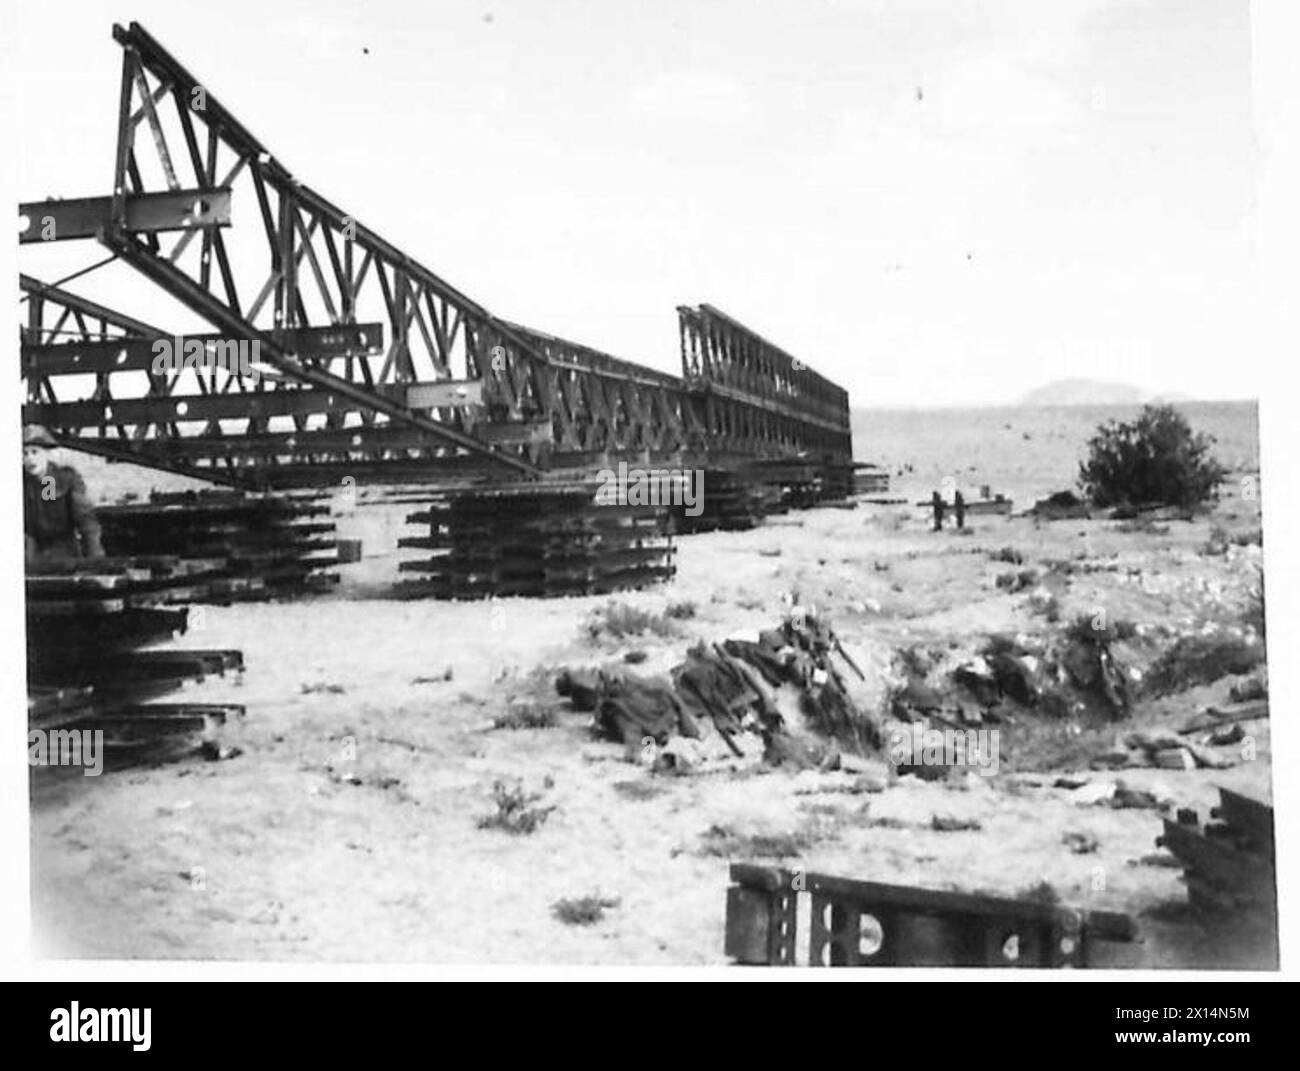 THE BRITISH ARMY IN THE TUNISIA CAMPAIGN, NOVEMBER 1942-MAY 1943 - General view of an almost completed Bailey Bridge (130 feet in length) across the Medjerda River at Medjez el Bab, 2 January 1943. It was erected by the 8th Field Squadron RE of the 6th Armoured Division British Army, British Army, 1st Army, British Army, 6th Armoured Division, British Army, Royal Engineers Stock Photo